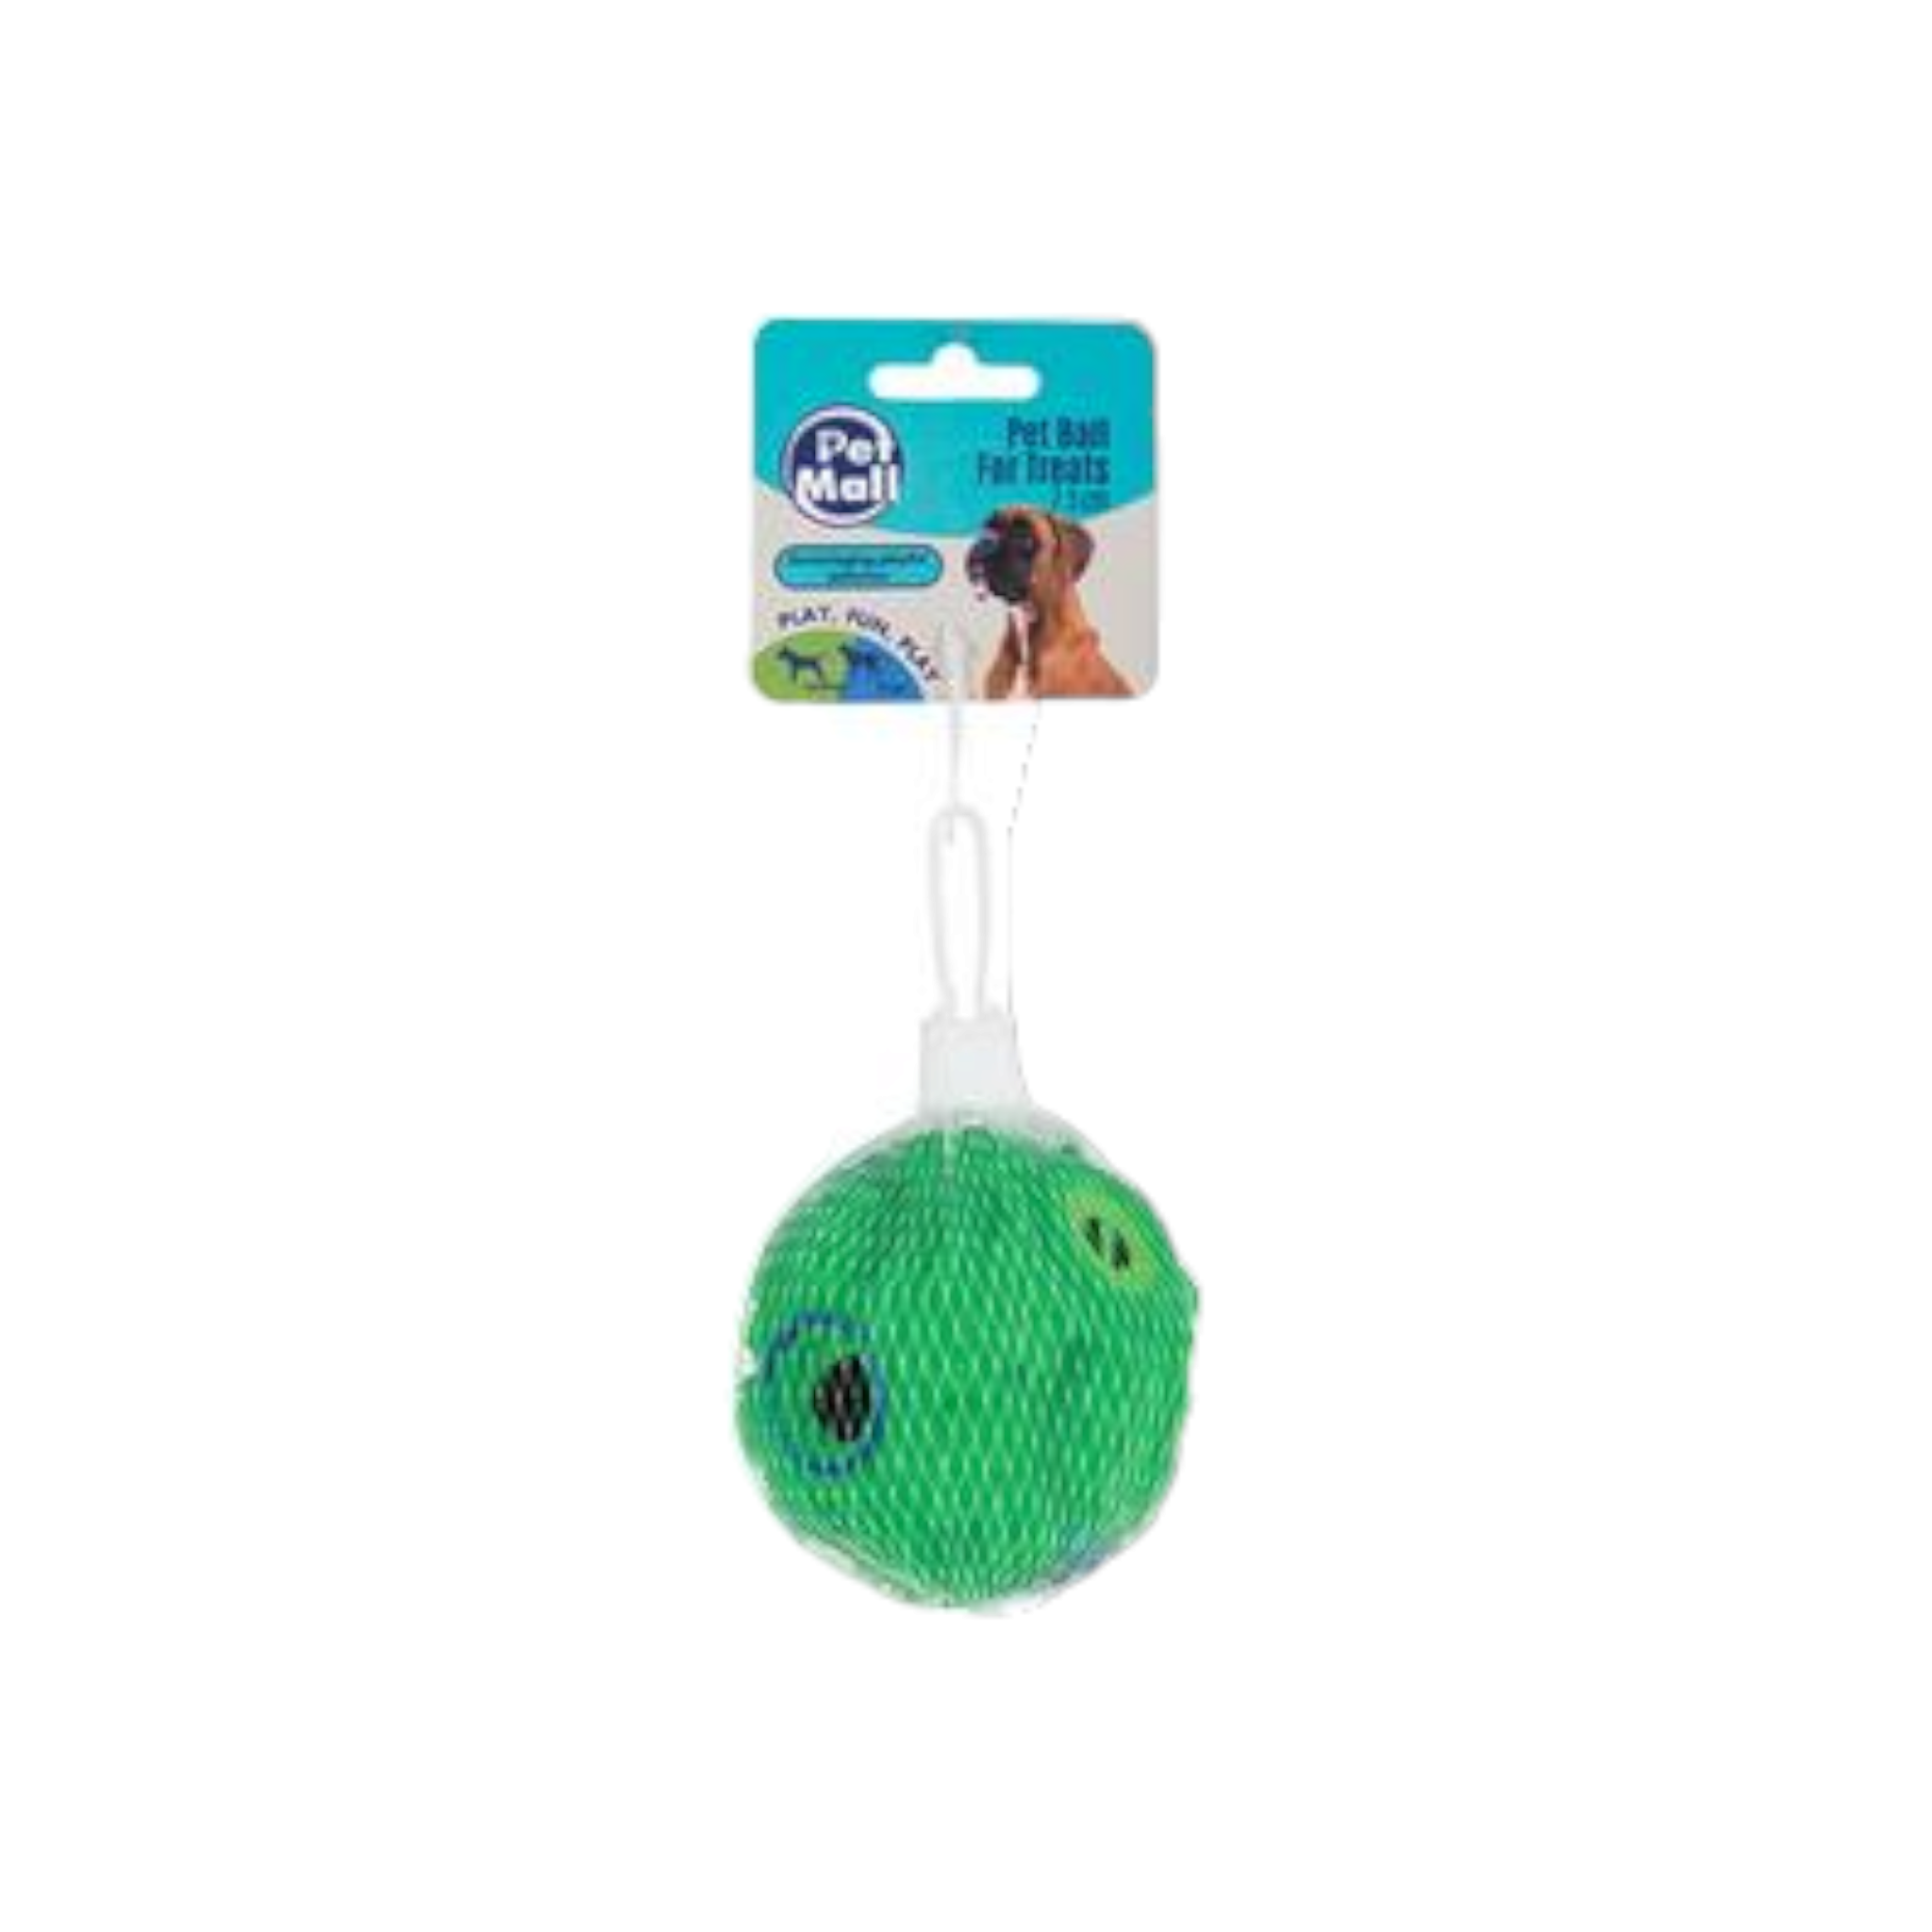 Pet Mall Dog Toy Chew Ball For Treats 7.5cm each